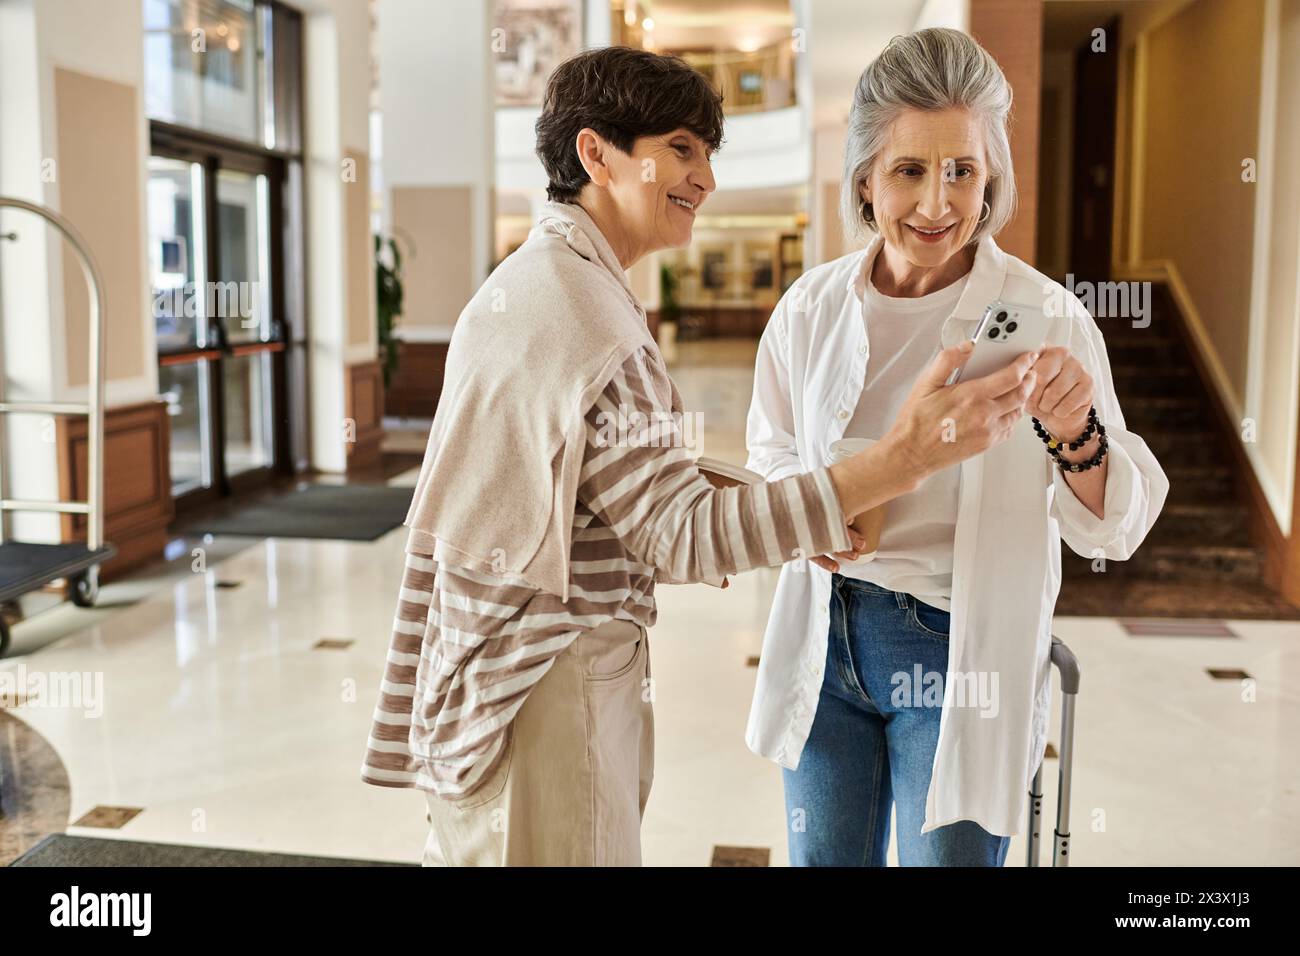 Senior lesbian couple share a moment while looking at a cell phone. Stock Photo